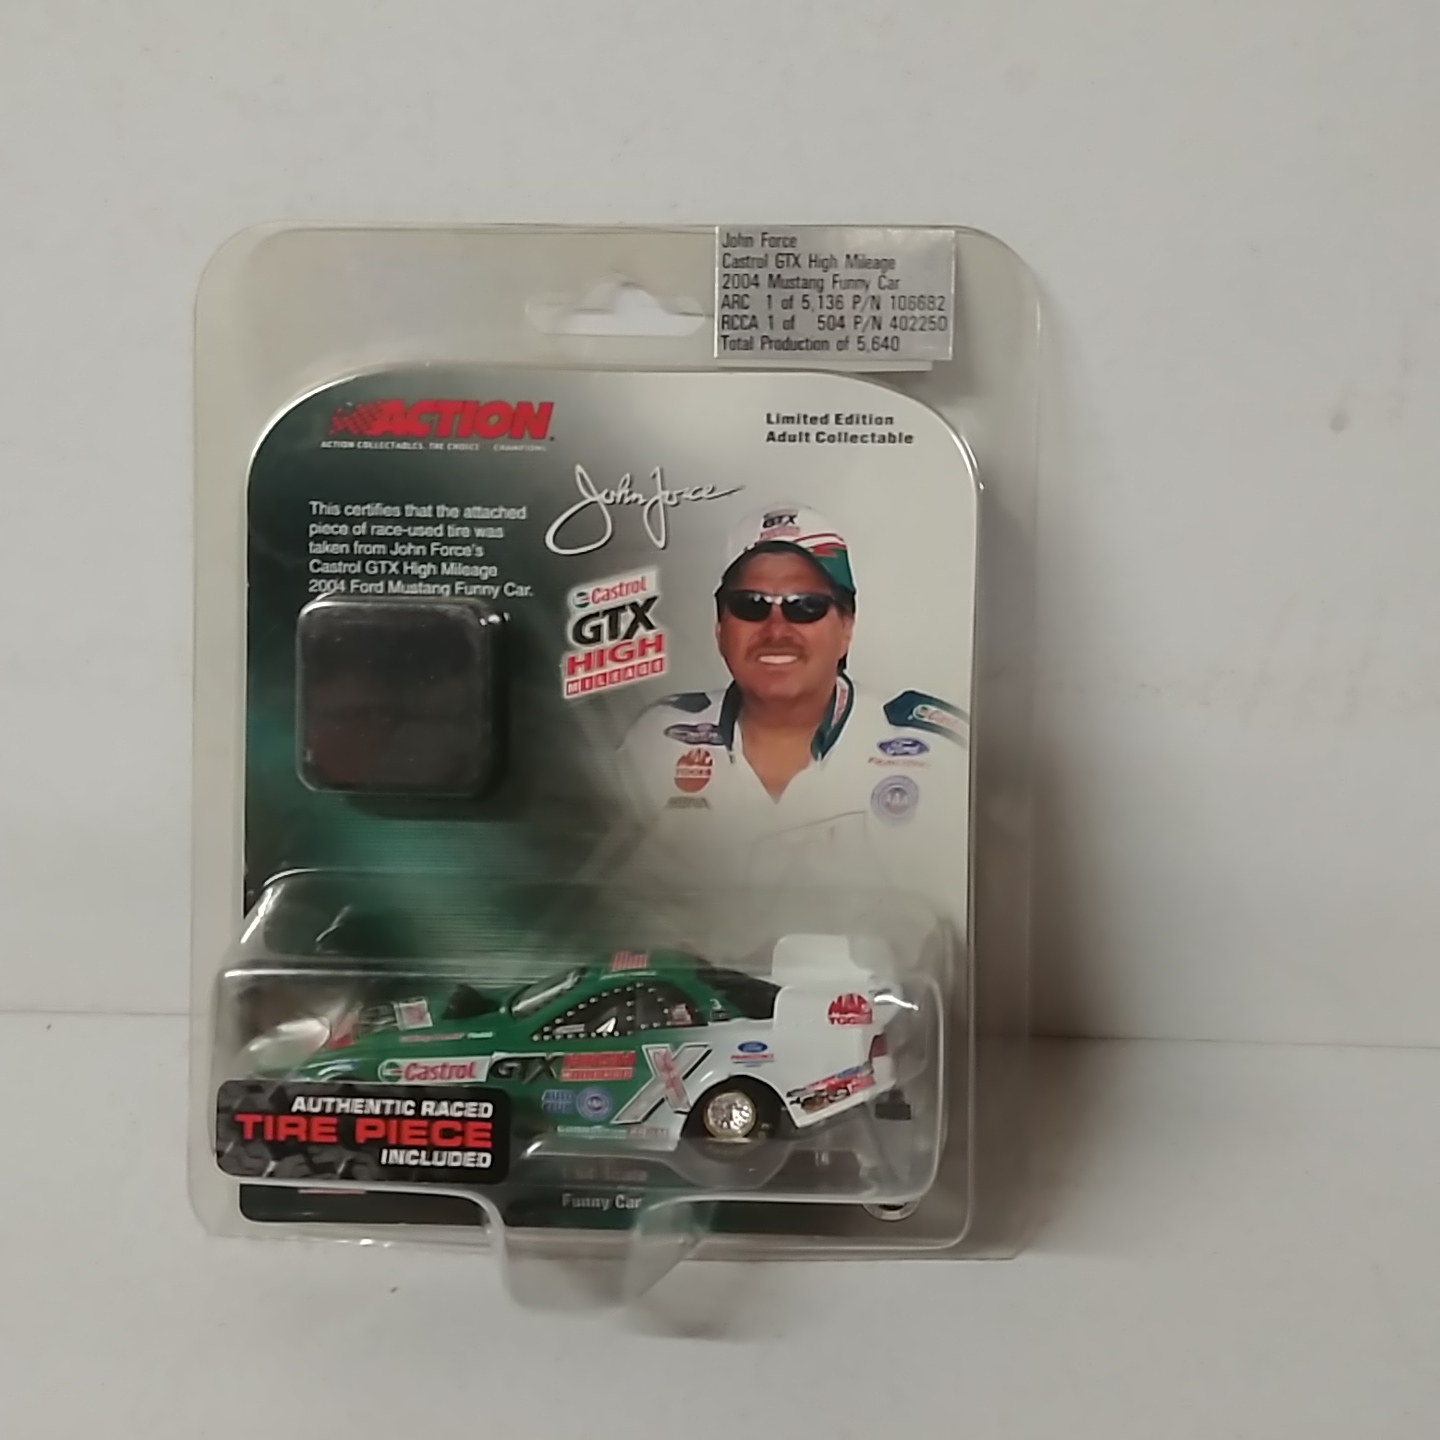 2004 John Force 1/64th Castrol GTX High Milage Mustang Funny car with piece of tire